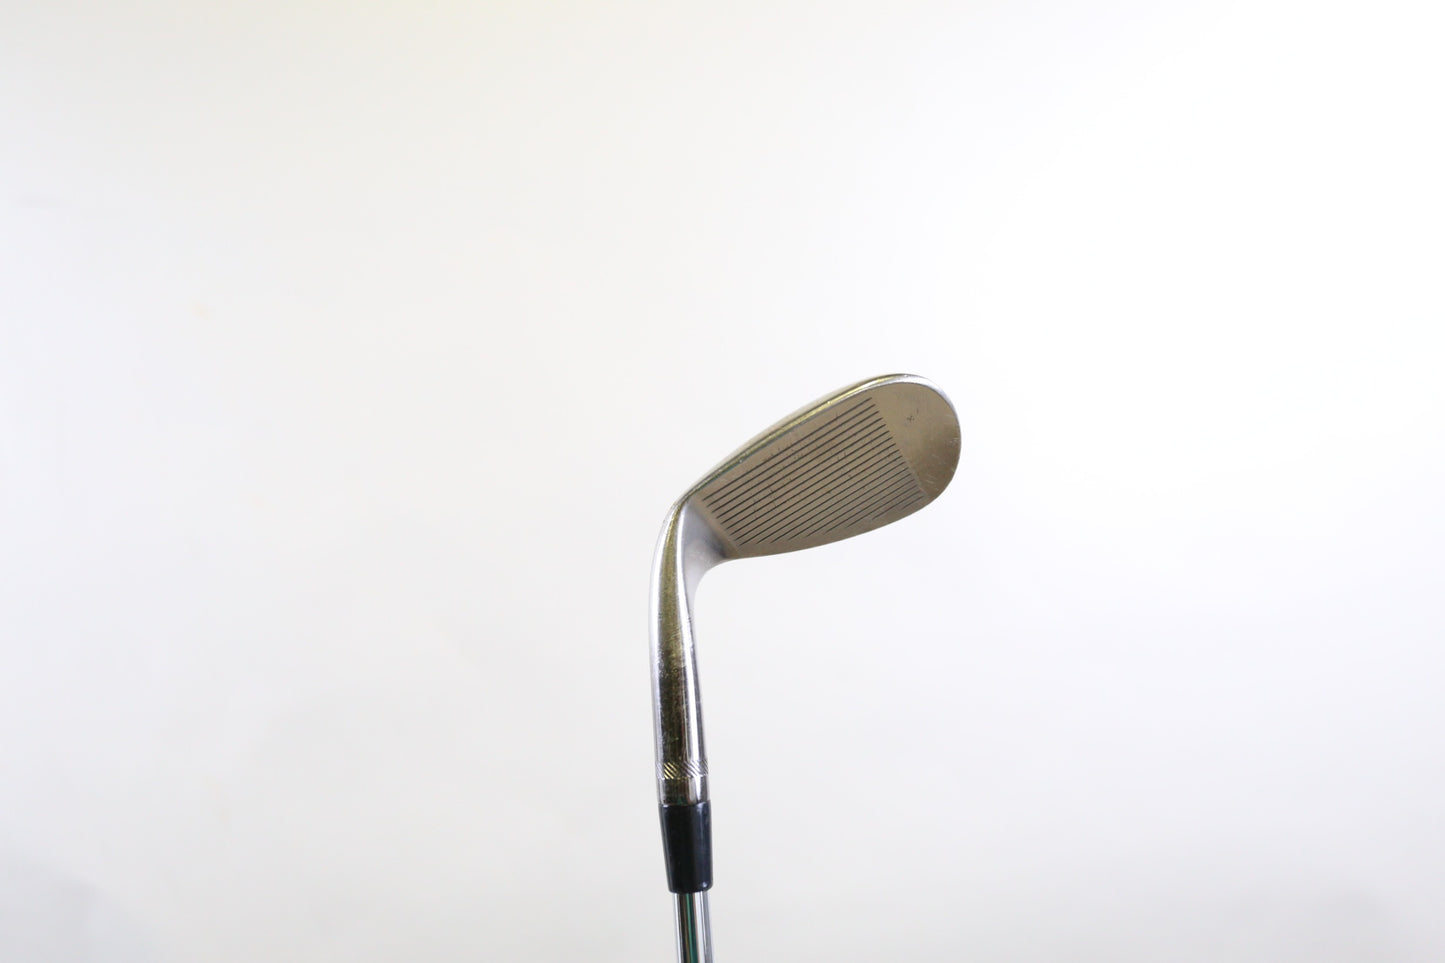 Used Titleist Vokey SM7 Brushed Steel S Grind Lob Wedge - Right-Handed - 60 Degrees - Stiff Flex